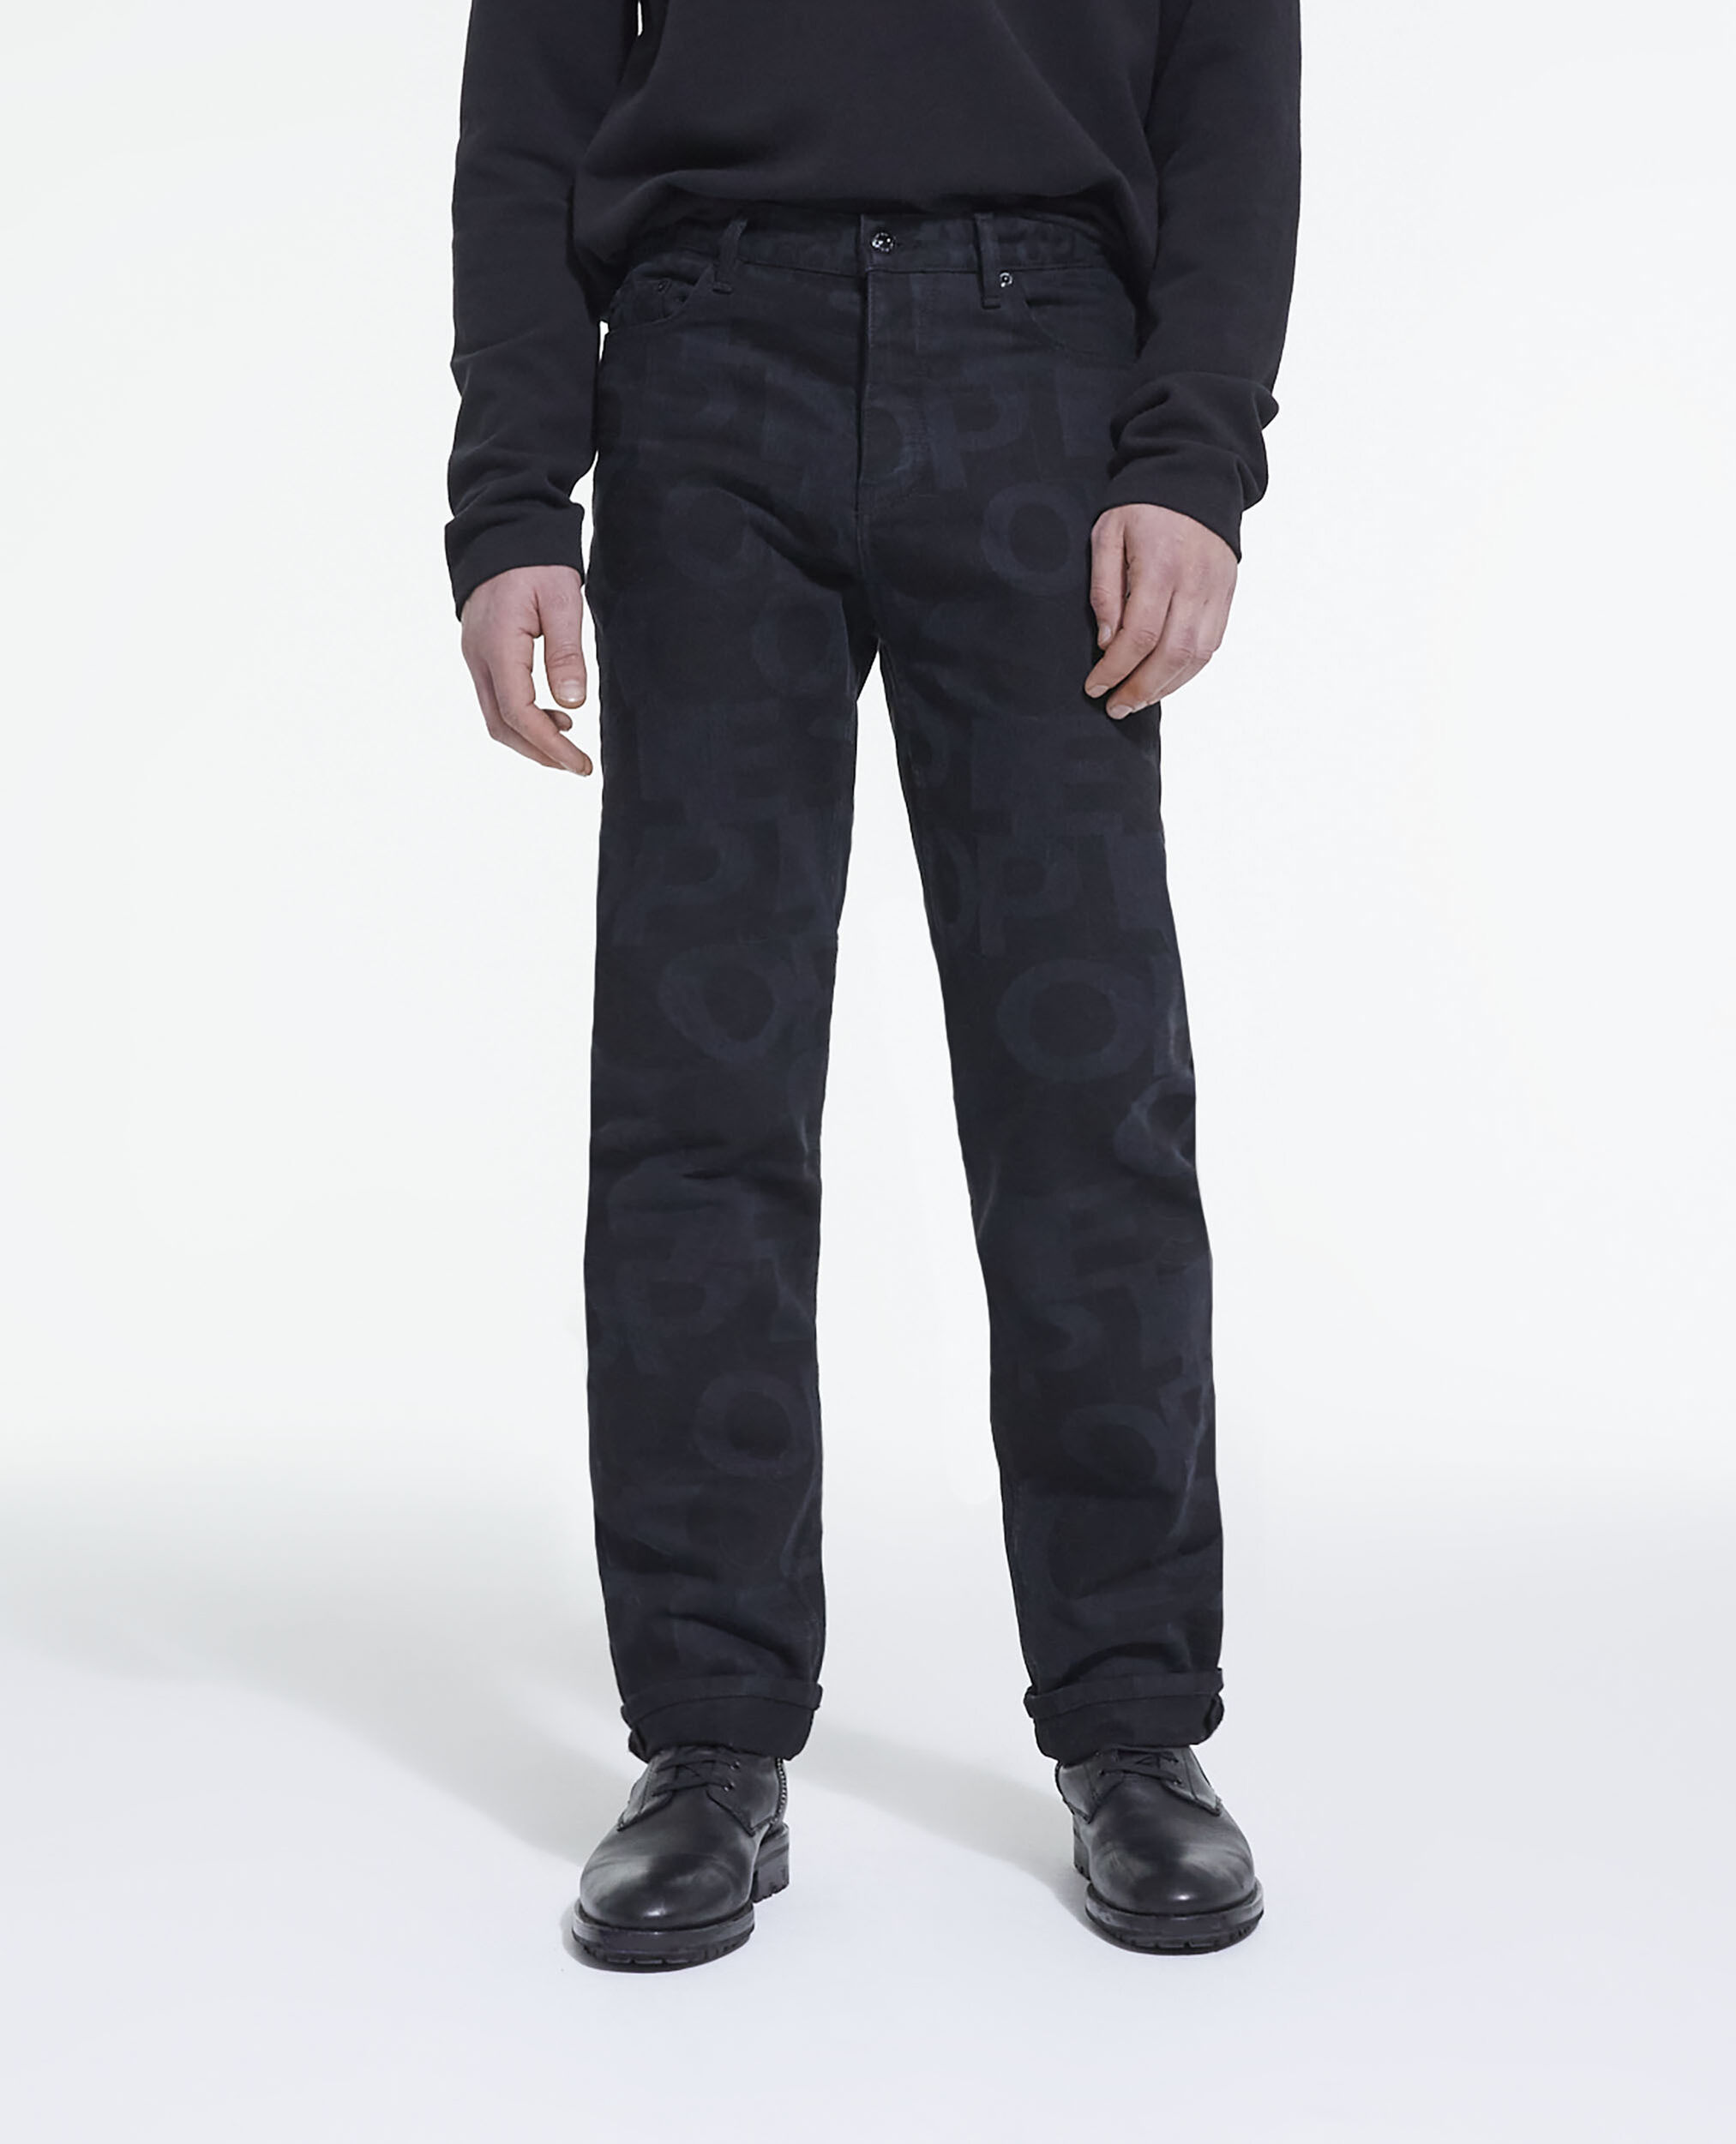 Straight-cut jeans with The Kooples logo, BLACK WASHED, hi-res image number null